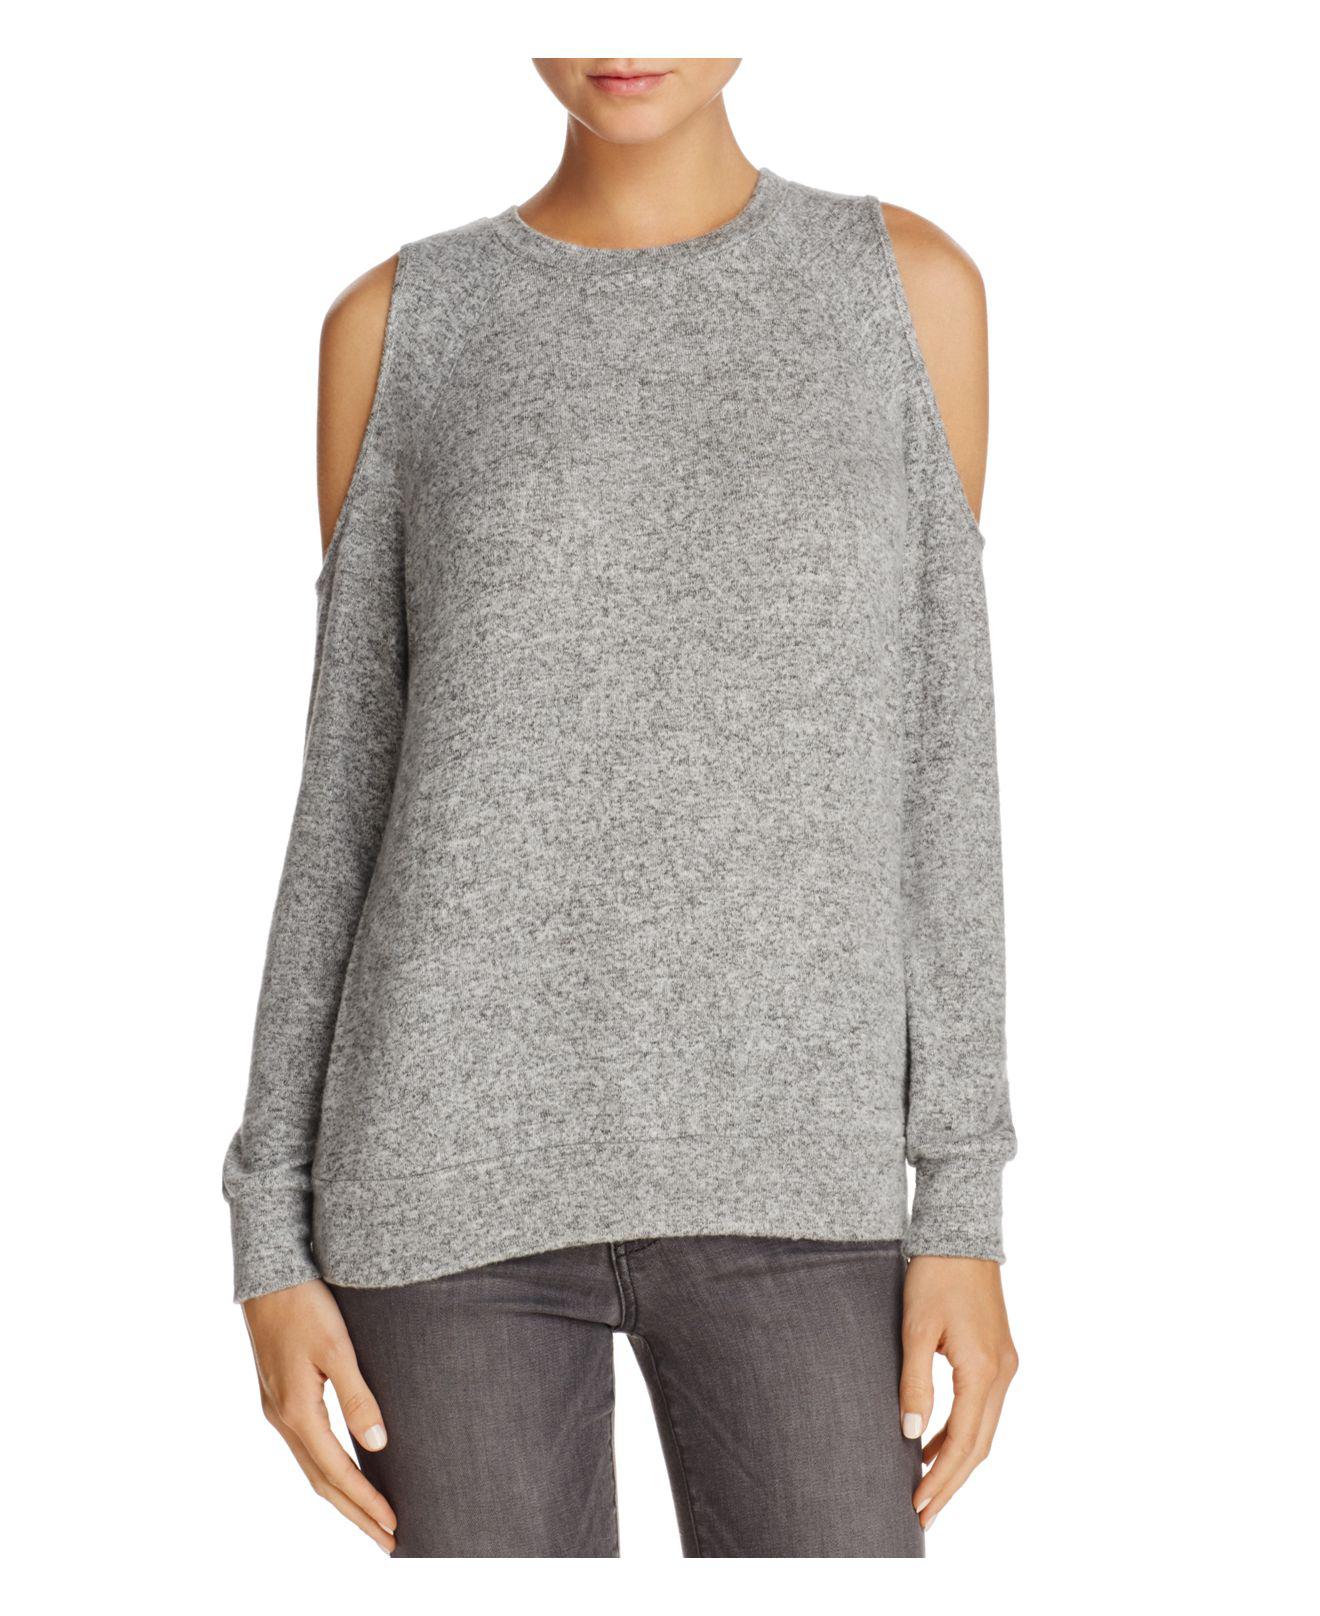 Aqua Cold-shoulder Sweater in Charcoal Gray (Gray) - Lyst